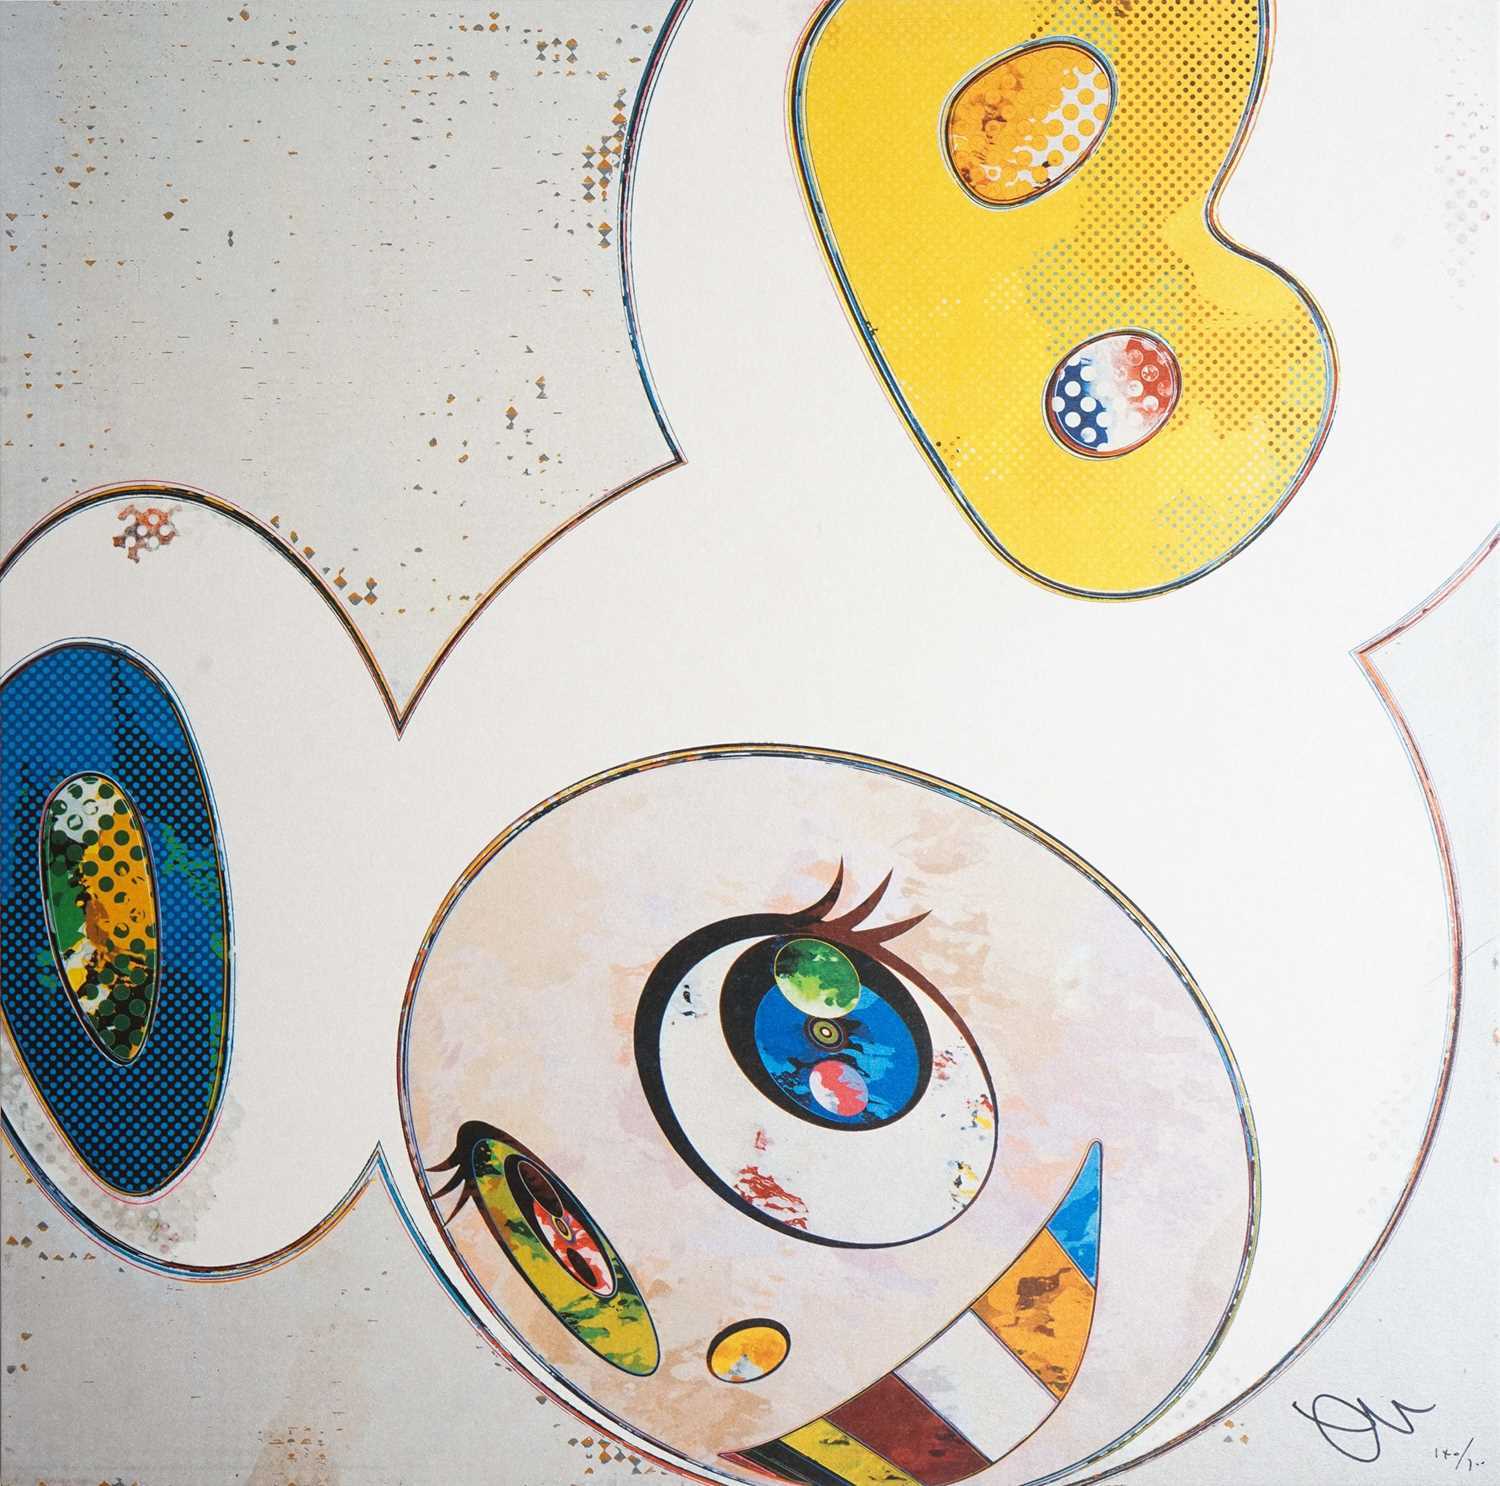 Lot 78 - Takashi Murakami (Japanese 1962-), 'And Then x6 (White: The Superflat Method, Blue and Yellow Ears)', 2013